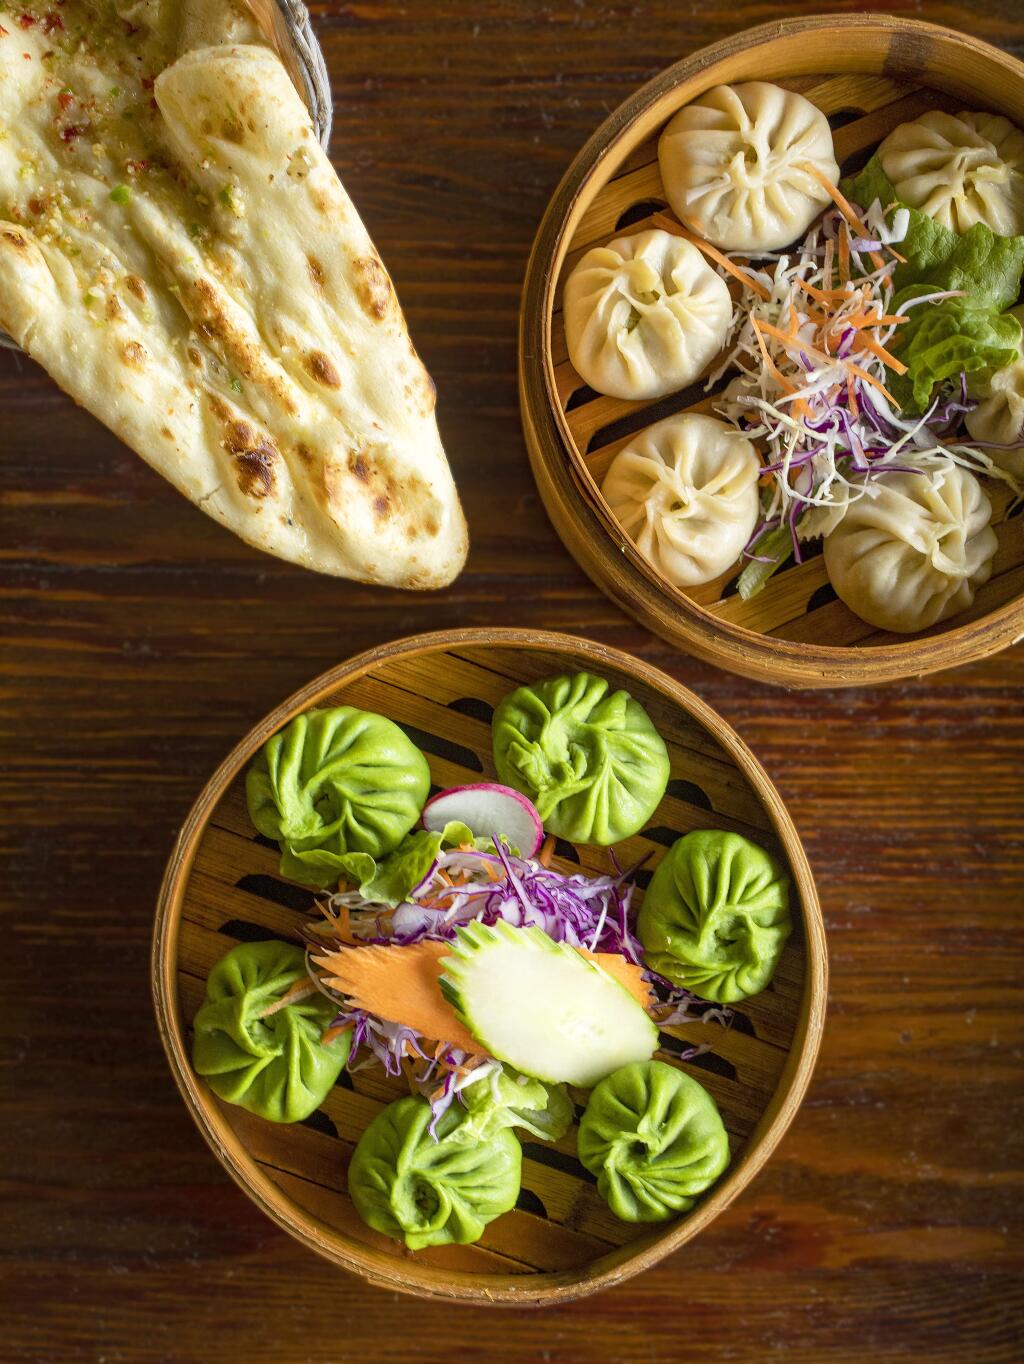 Vegetable, below, and Chicken Momos serve with a Somname mint sauce from Yeti Indian Nepalese Restaurant in Santa Rosa and Glen Ellen. (John Burgess/The Press Democrat)